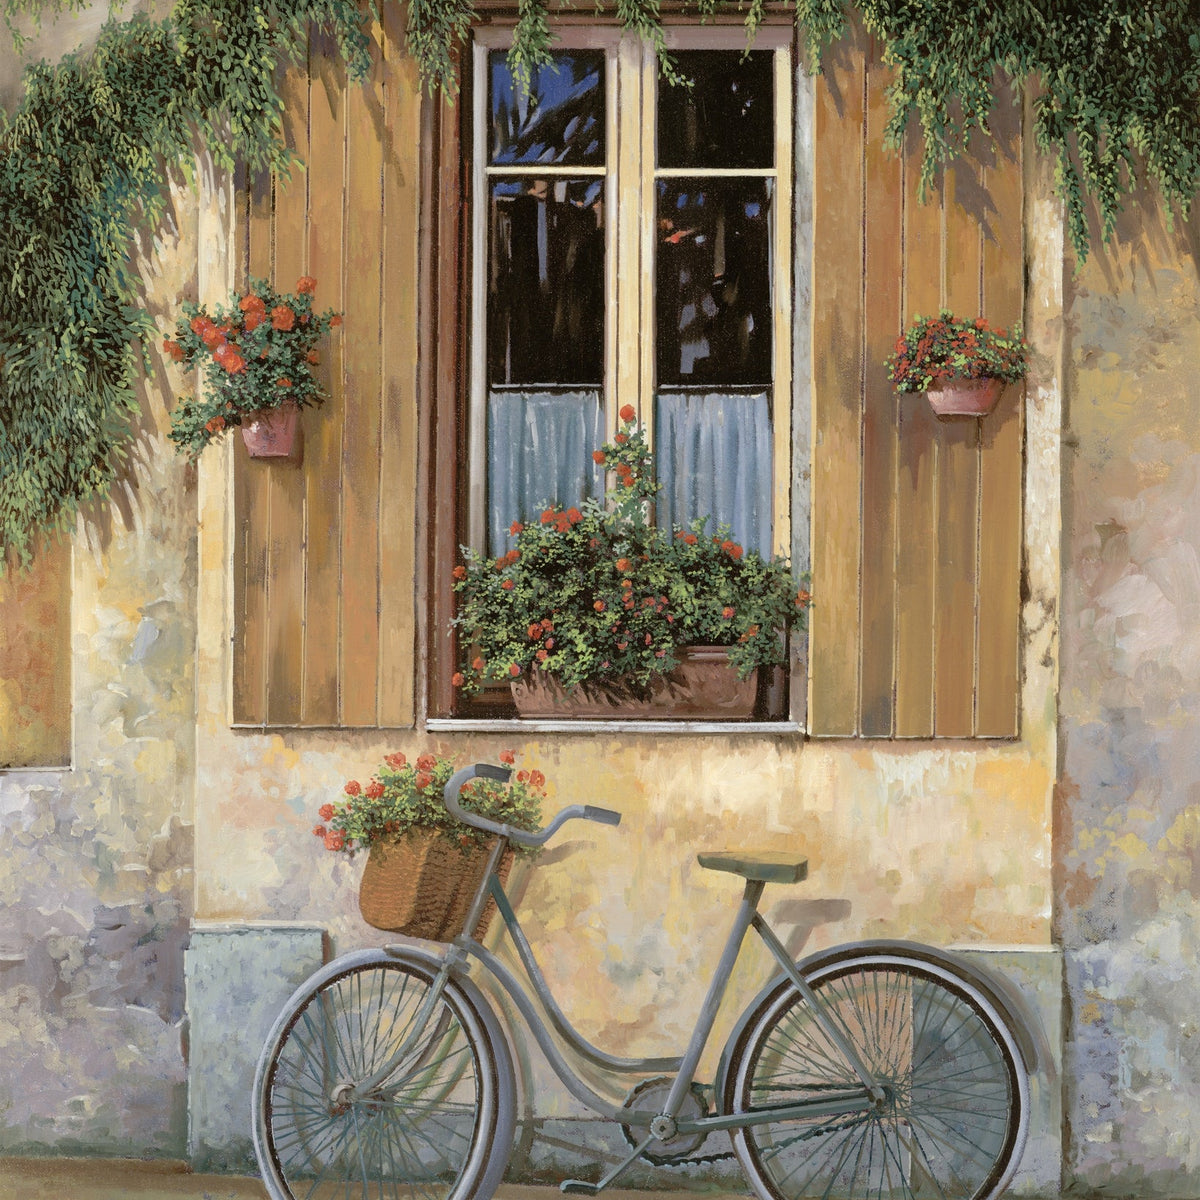 Bicycle with Flowers - 16"x20" (40x50cm) - Canvas by Numbers US